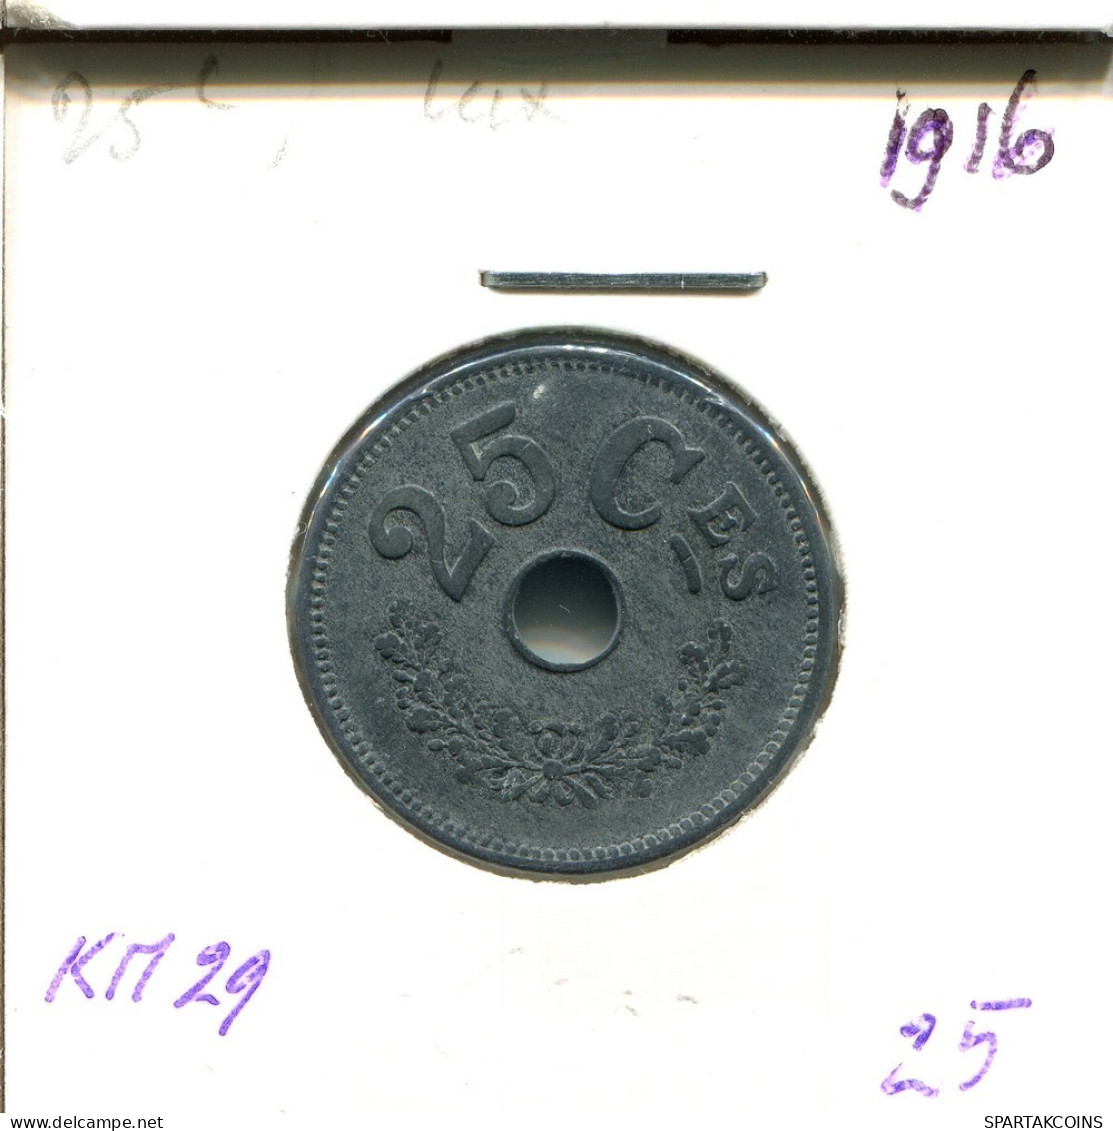 25 CENTIMES 1916 LUXEMBURG LUXEMBOURG Münze #AT183.D.A - Luxemburg